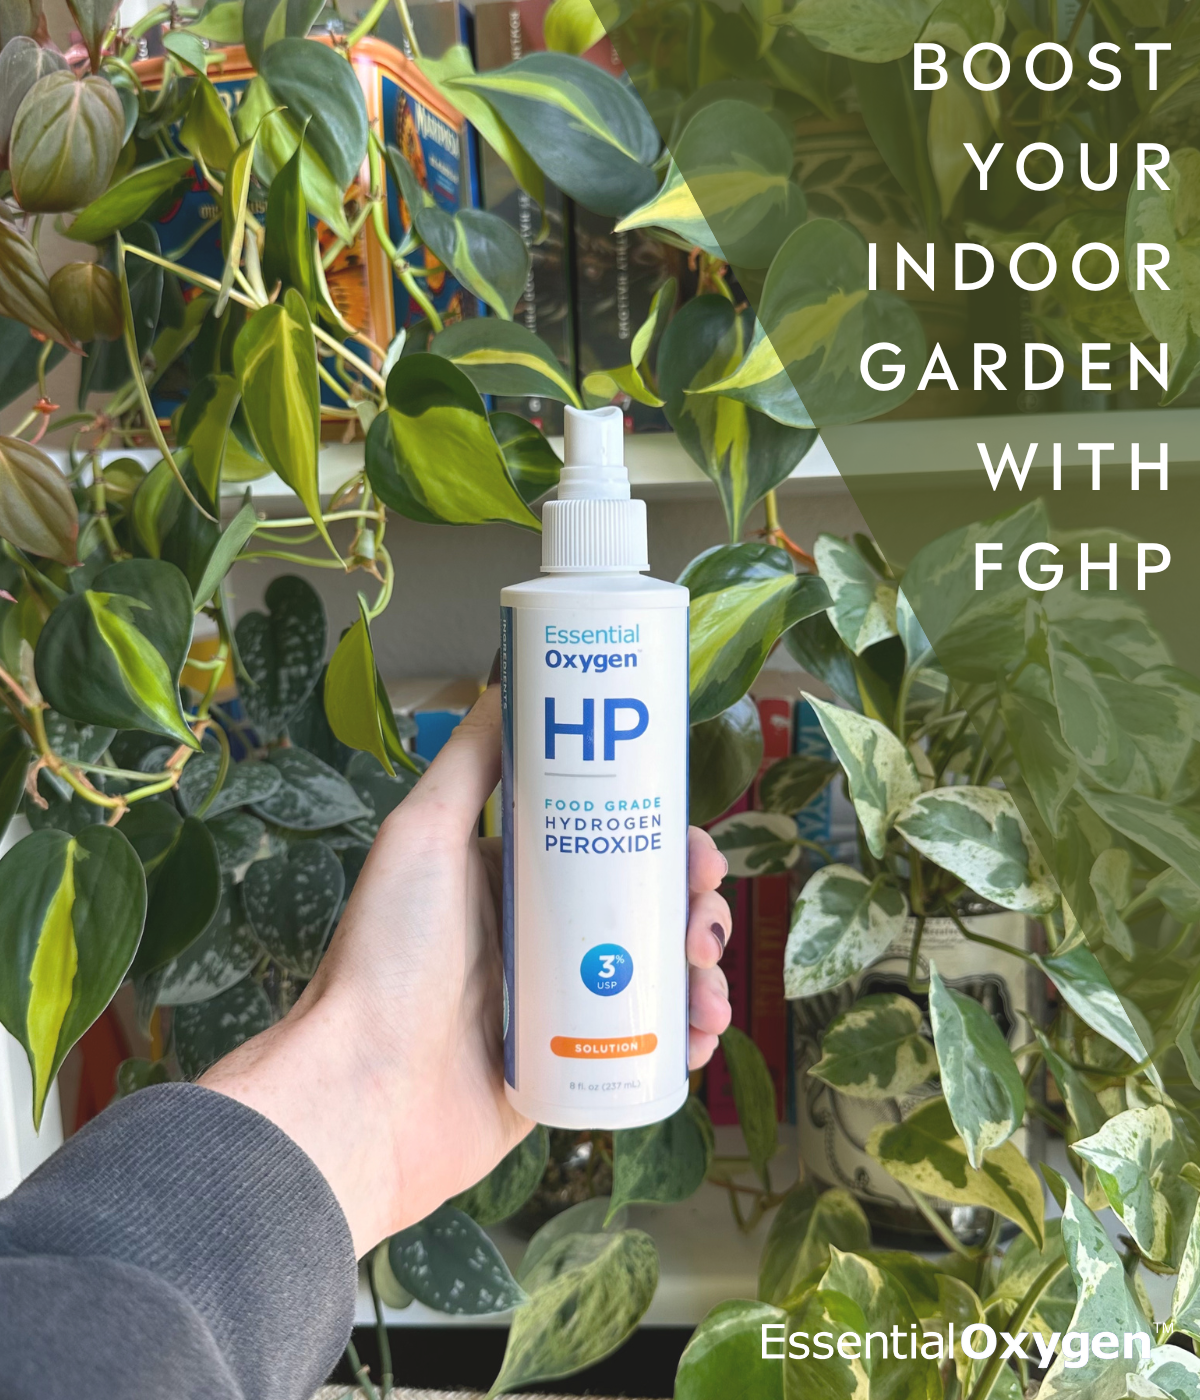 BOOST YOUR GARDEN WITH FGHP